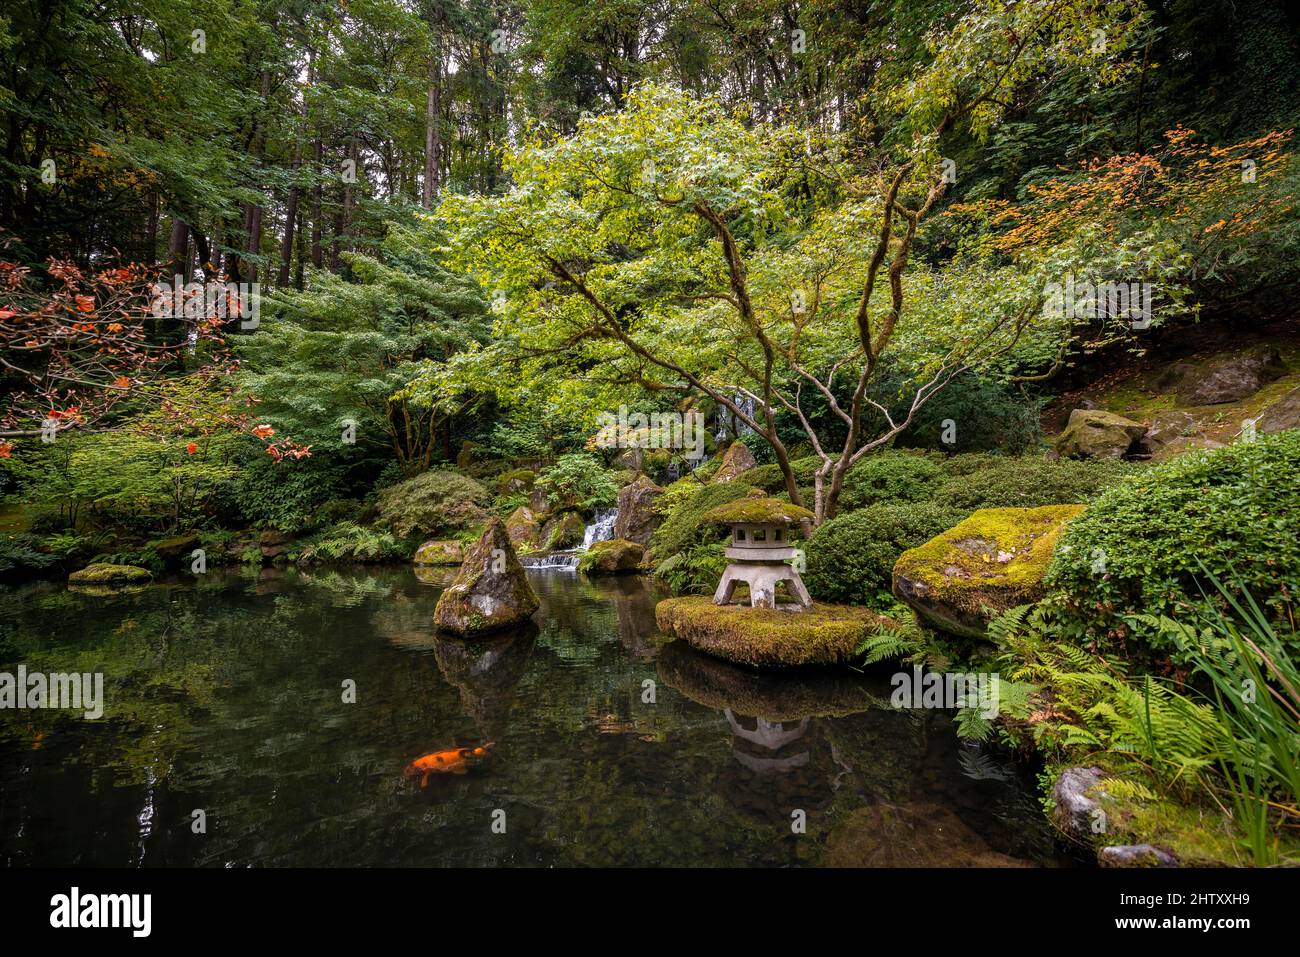 Pond in Japan stock photo. Image of deep, nature, japan - 182546932